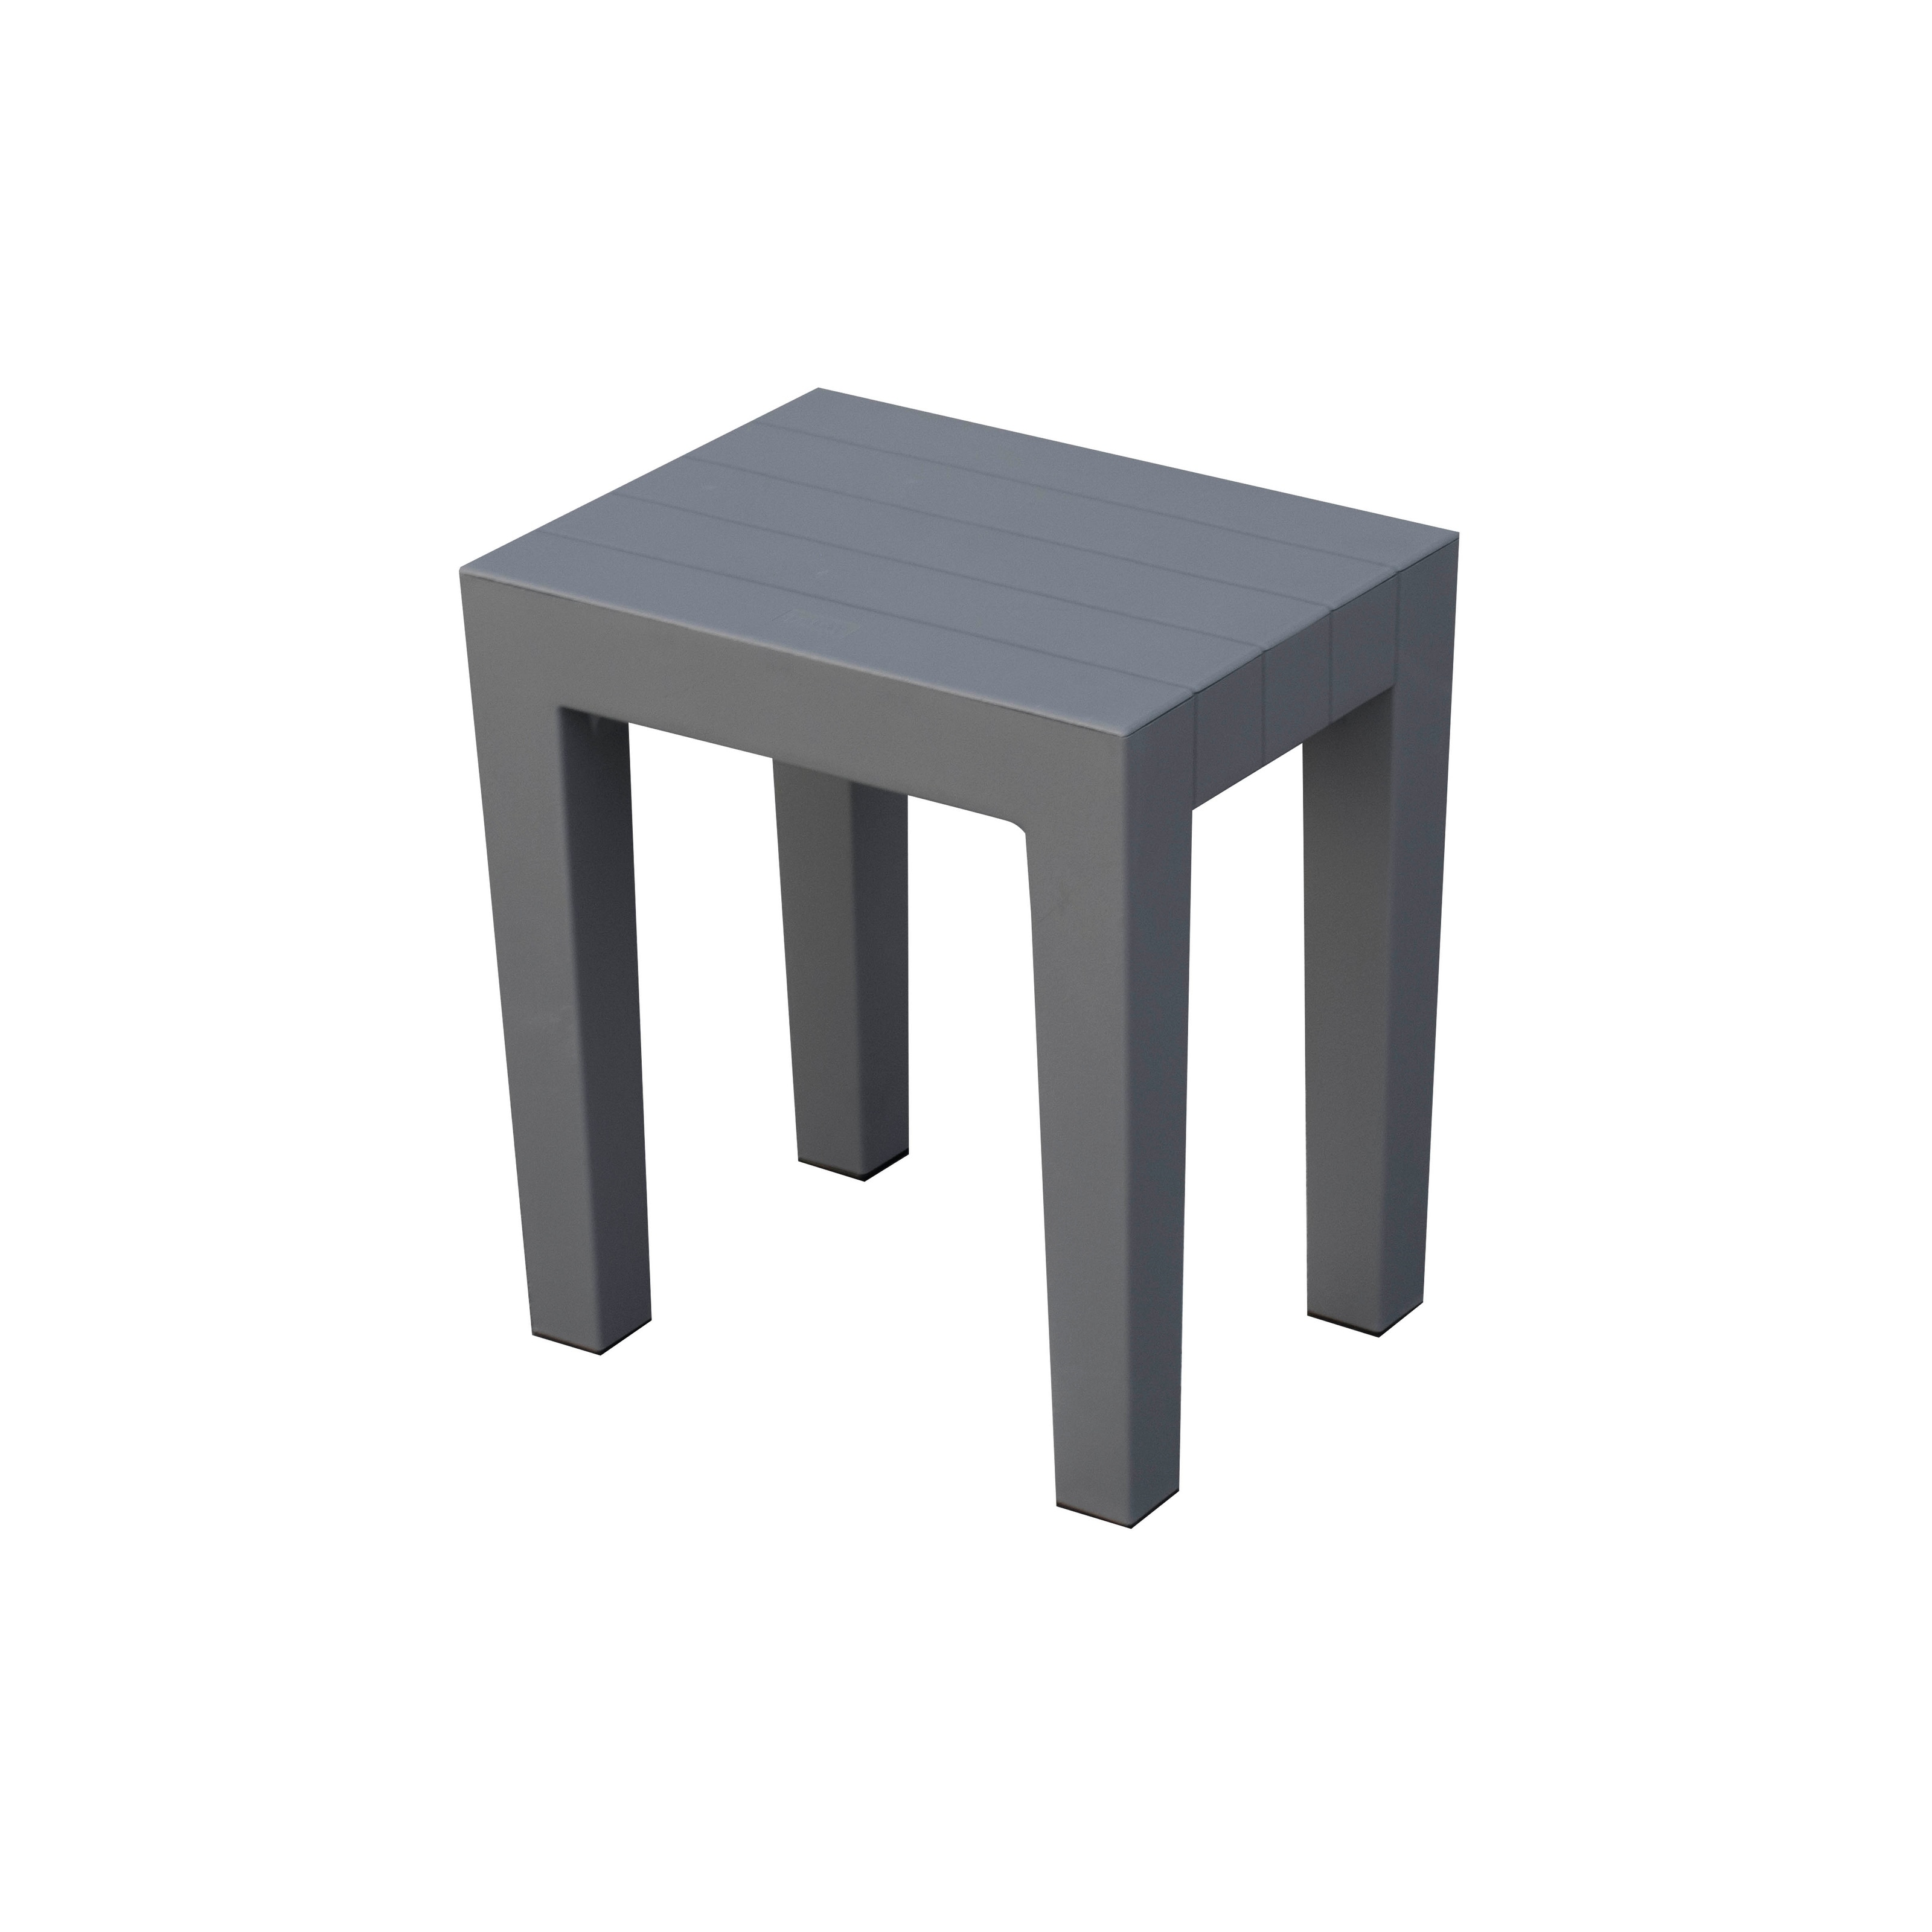 DesignByIntent Recyclable Polypropylene Indestructible Shower Stool Laughing Gull Gray Color 0c4ec7b5 46a2 49ea a5dc ac8329672bcf